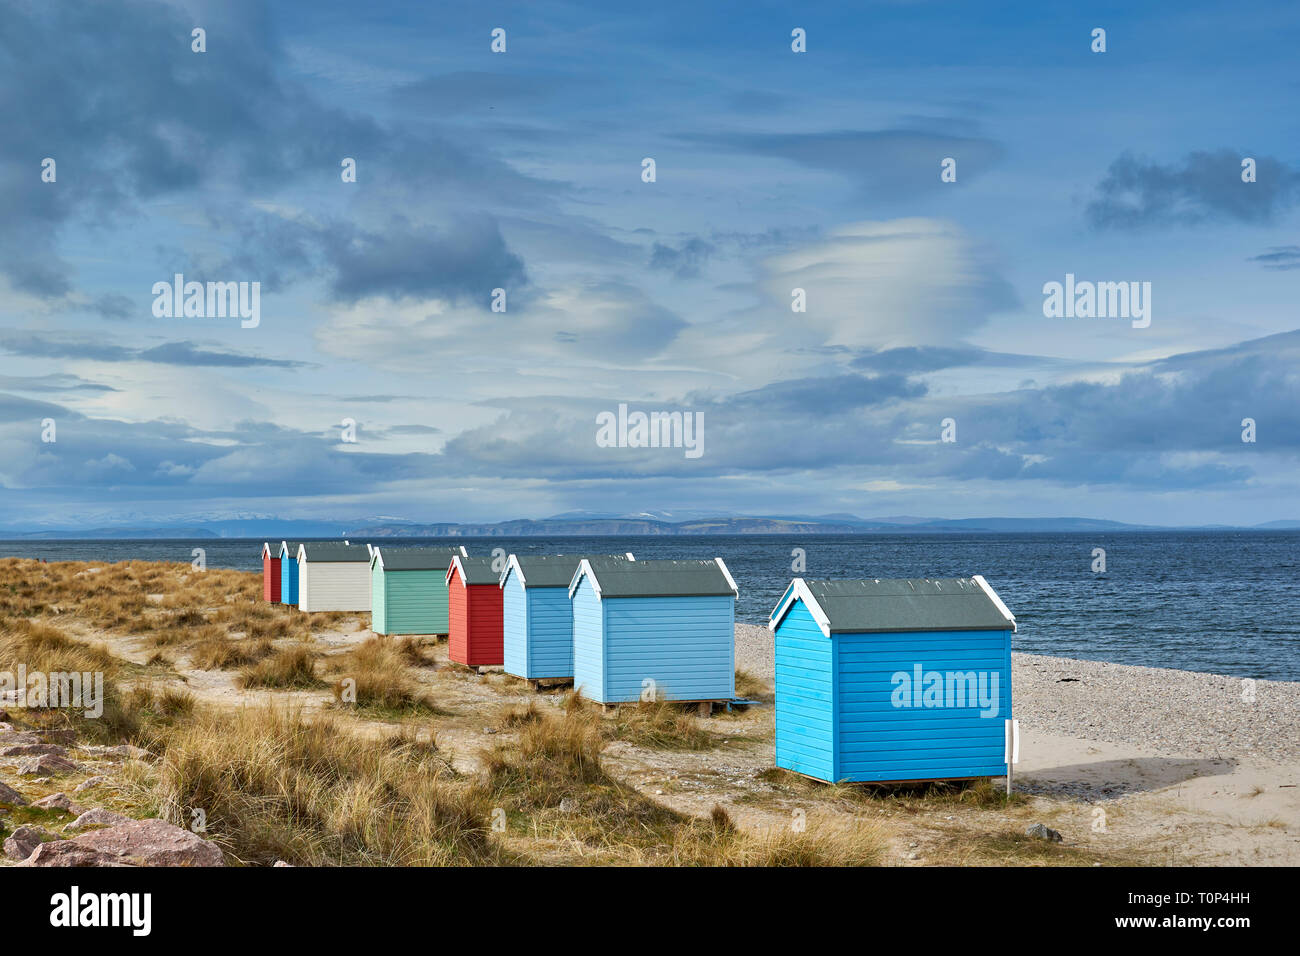 FINDHORN BEACH MORAY FIRTH SCOTLAND EIGHT PASTEL COLOURED CHALETS OR BEACH HUTS ON PEBBLE BEACH SNOW OVER THE HILLS AND BLACK ISLE Stock Photo